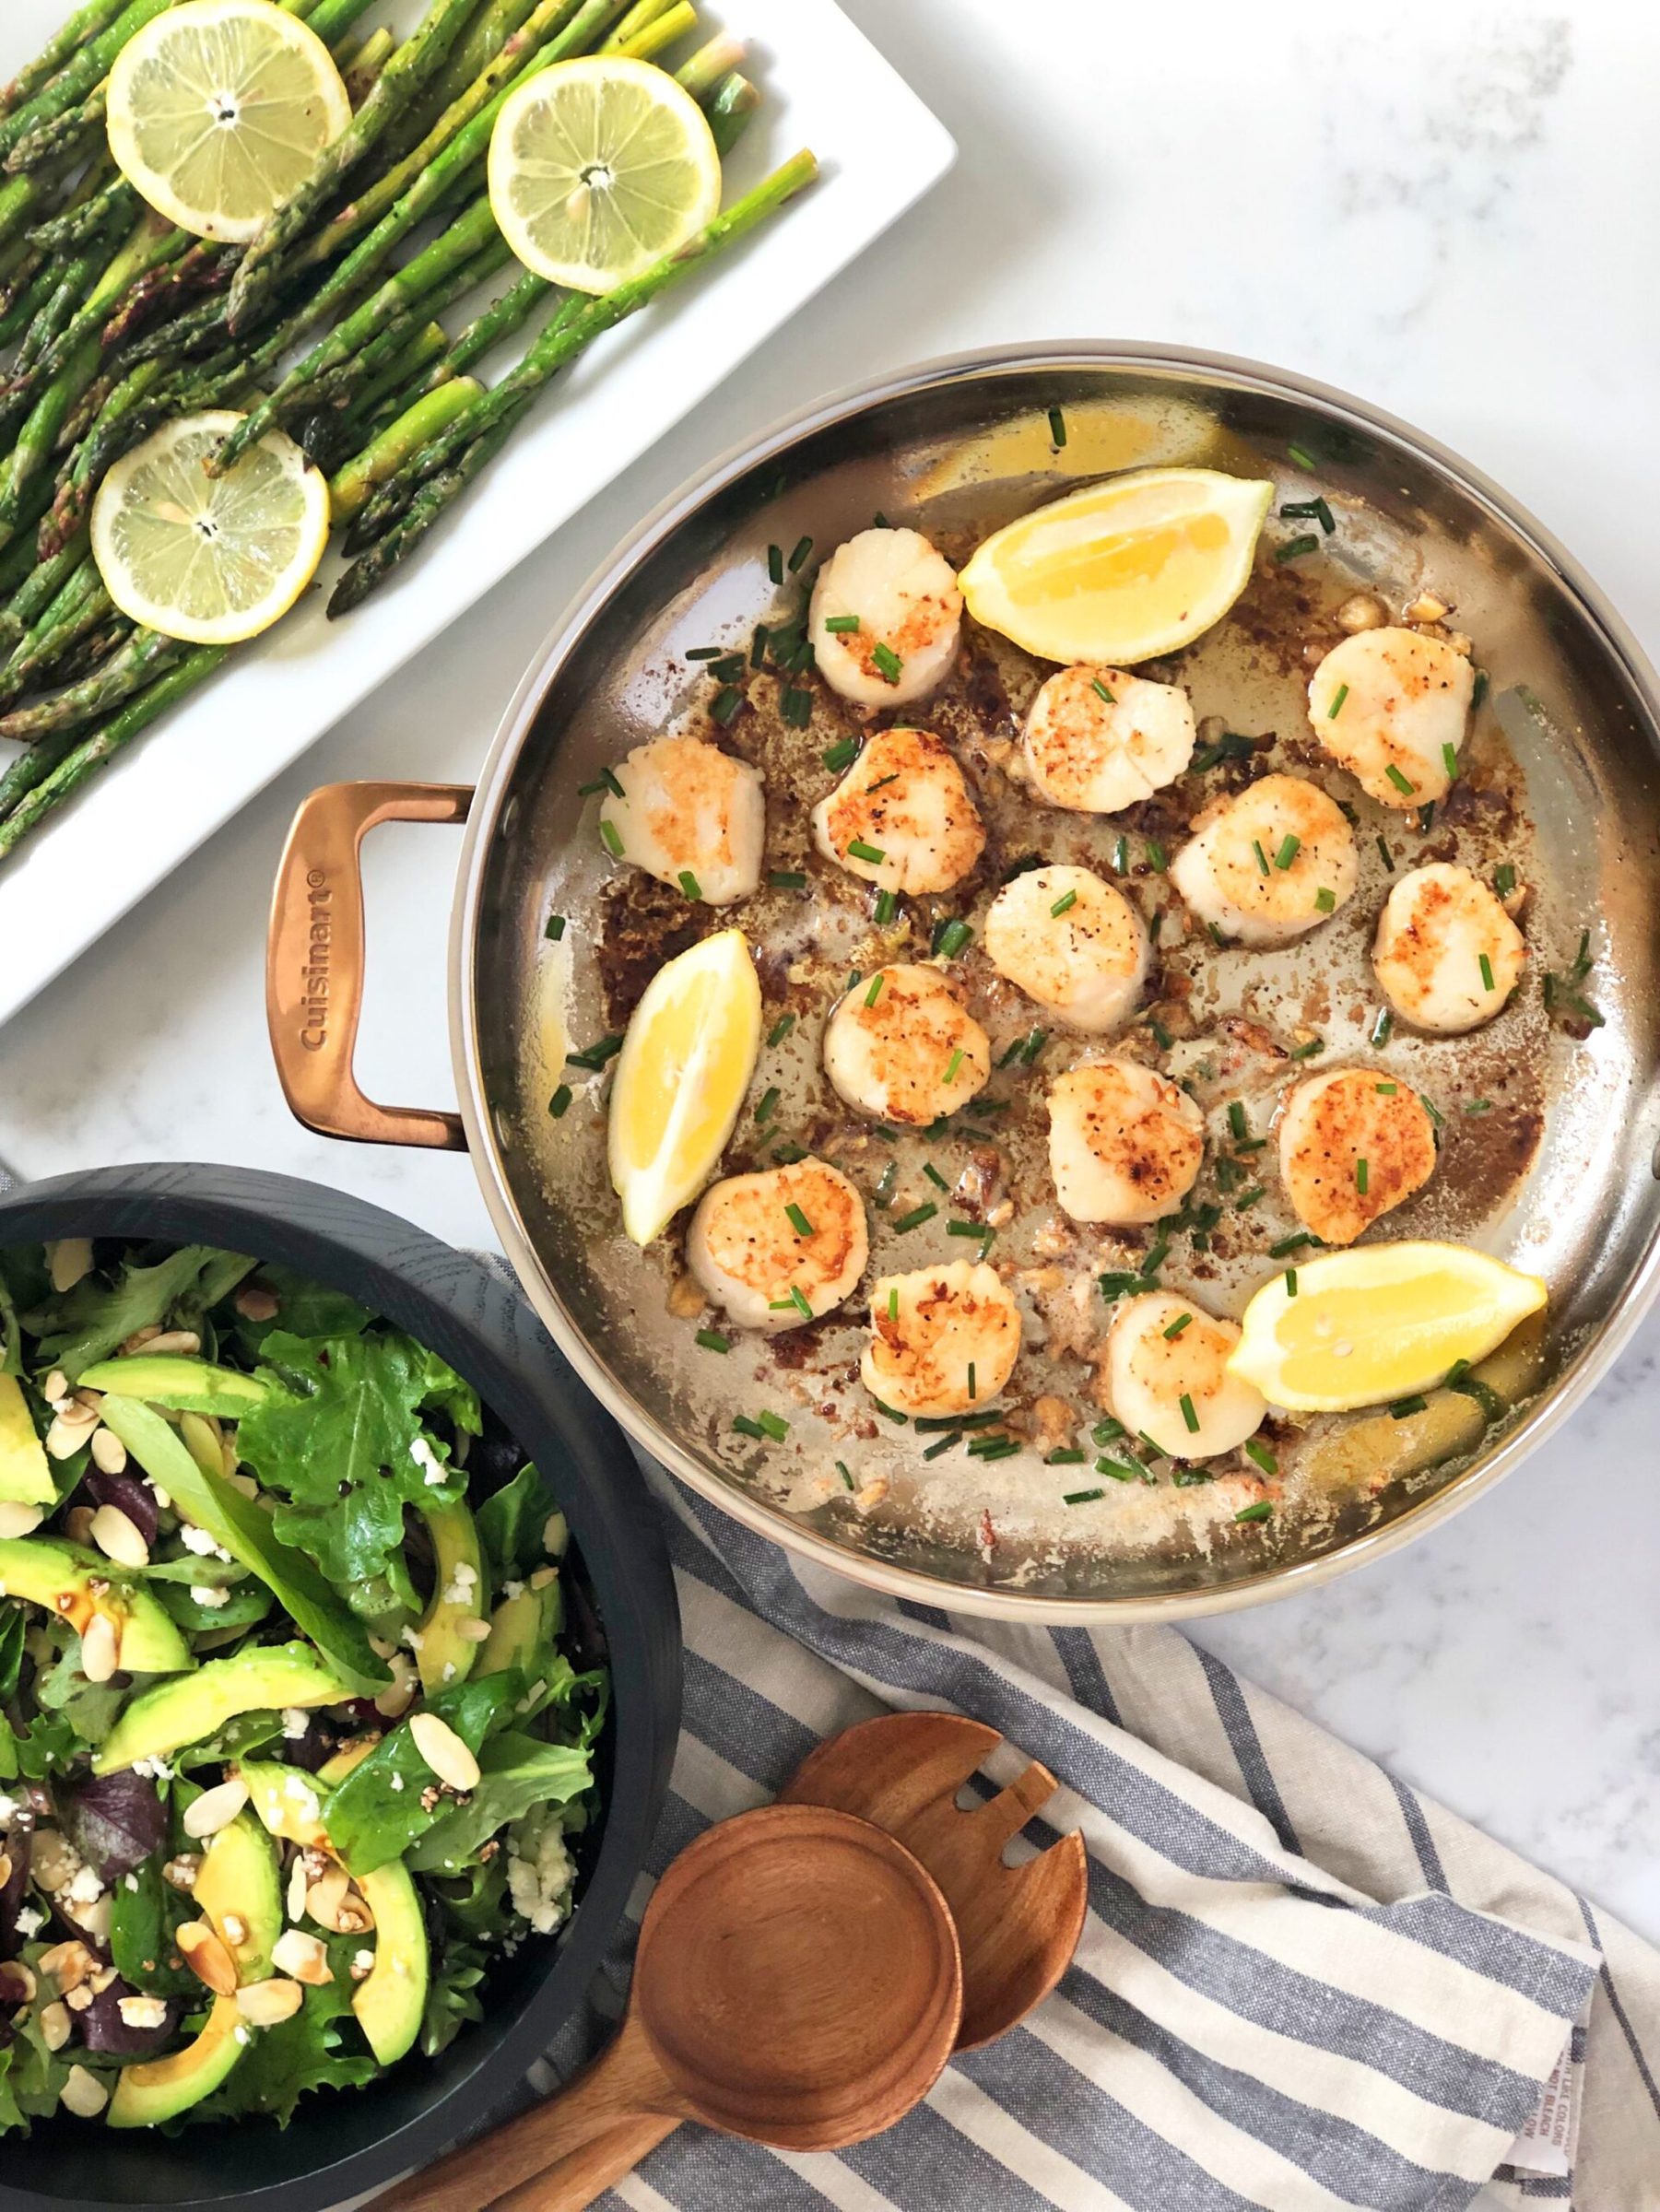 Pan-Seared Scallops With Lemon-Pepper Asparagus And Mixed Greens Salad